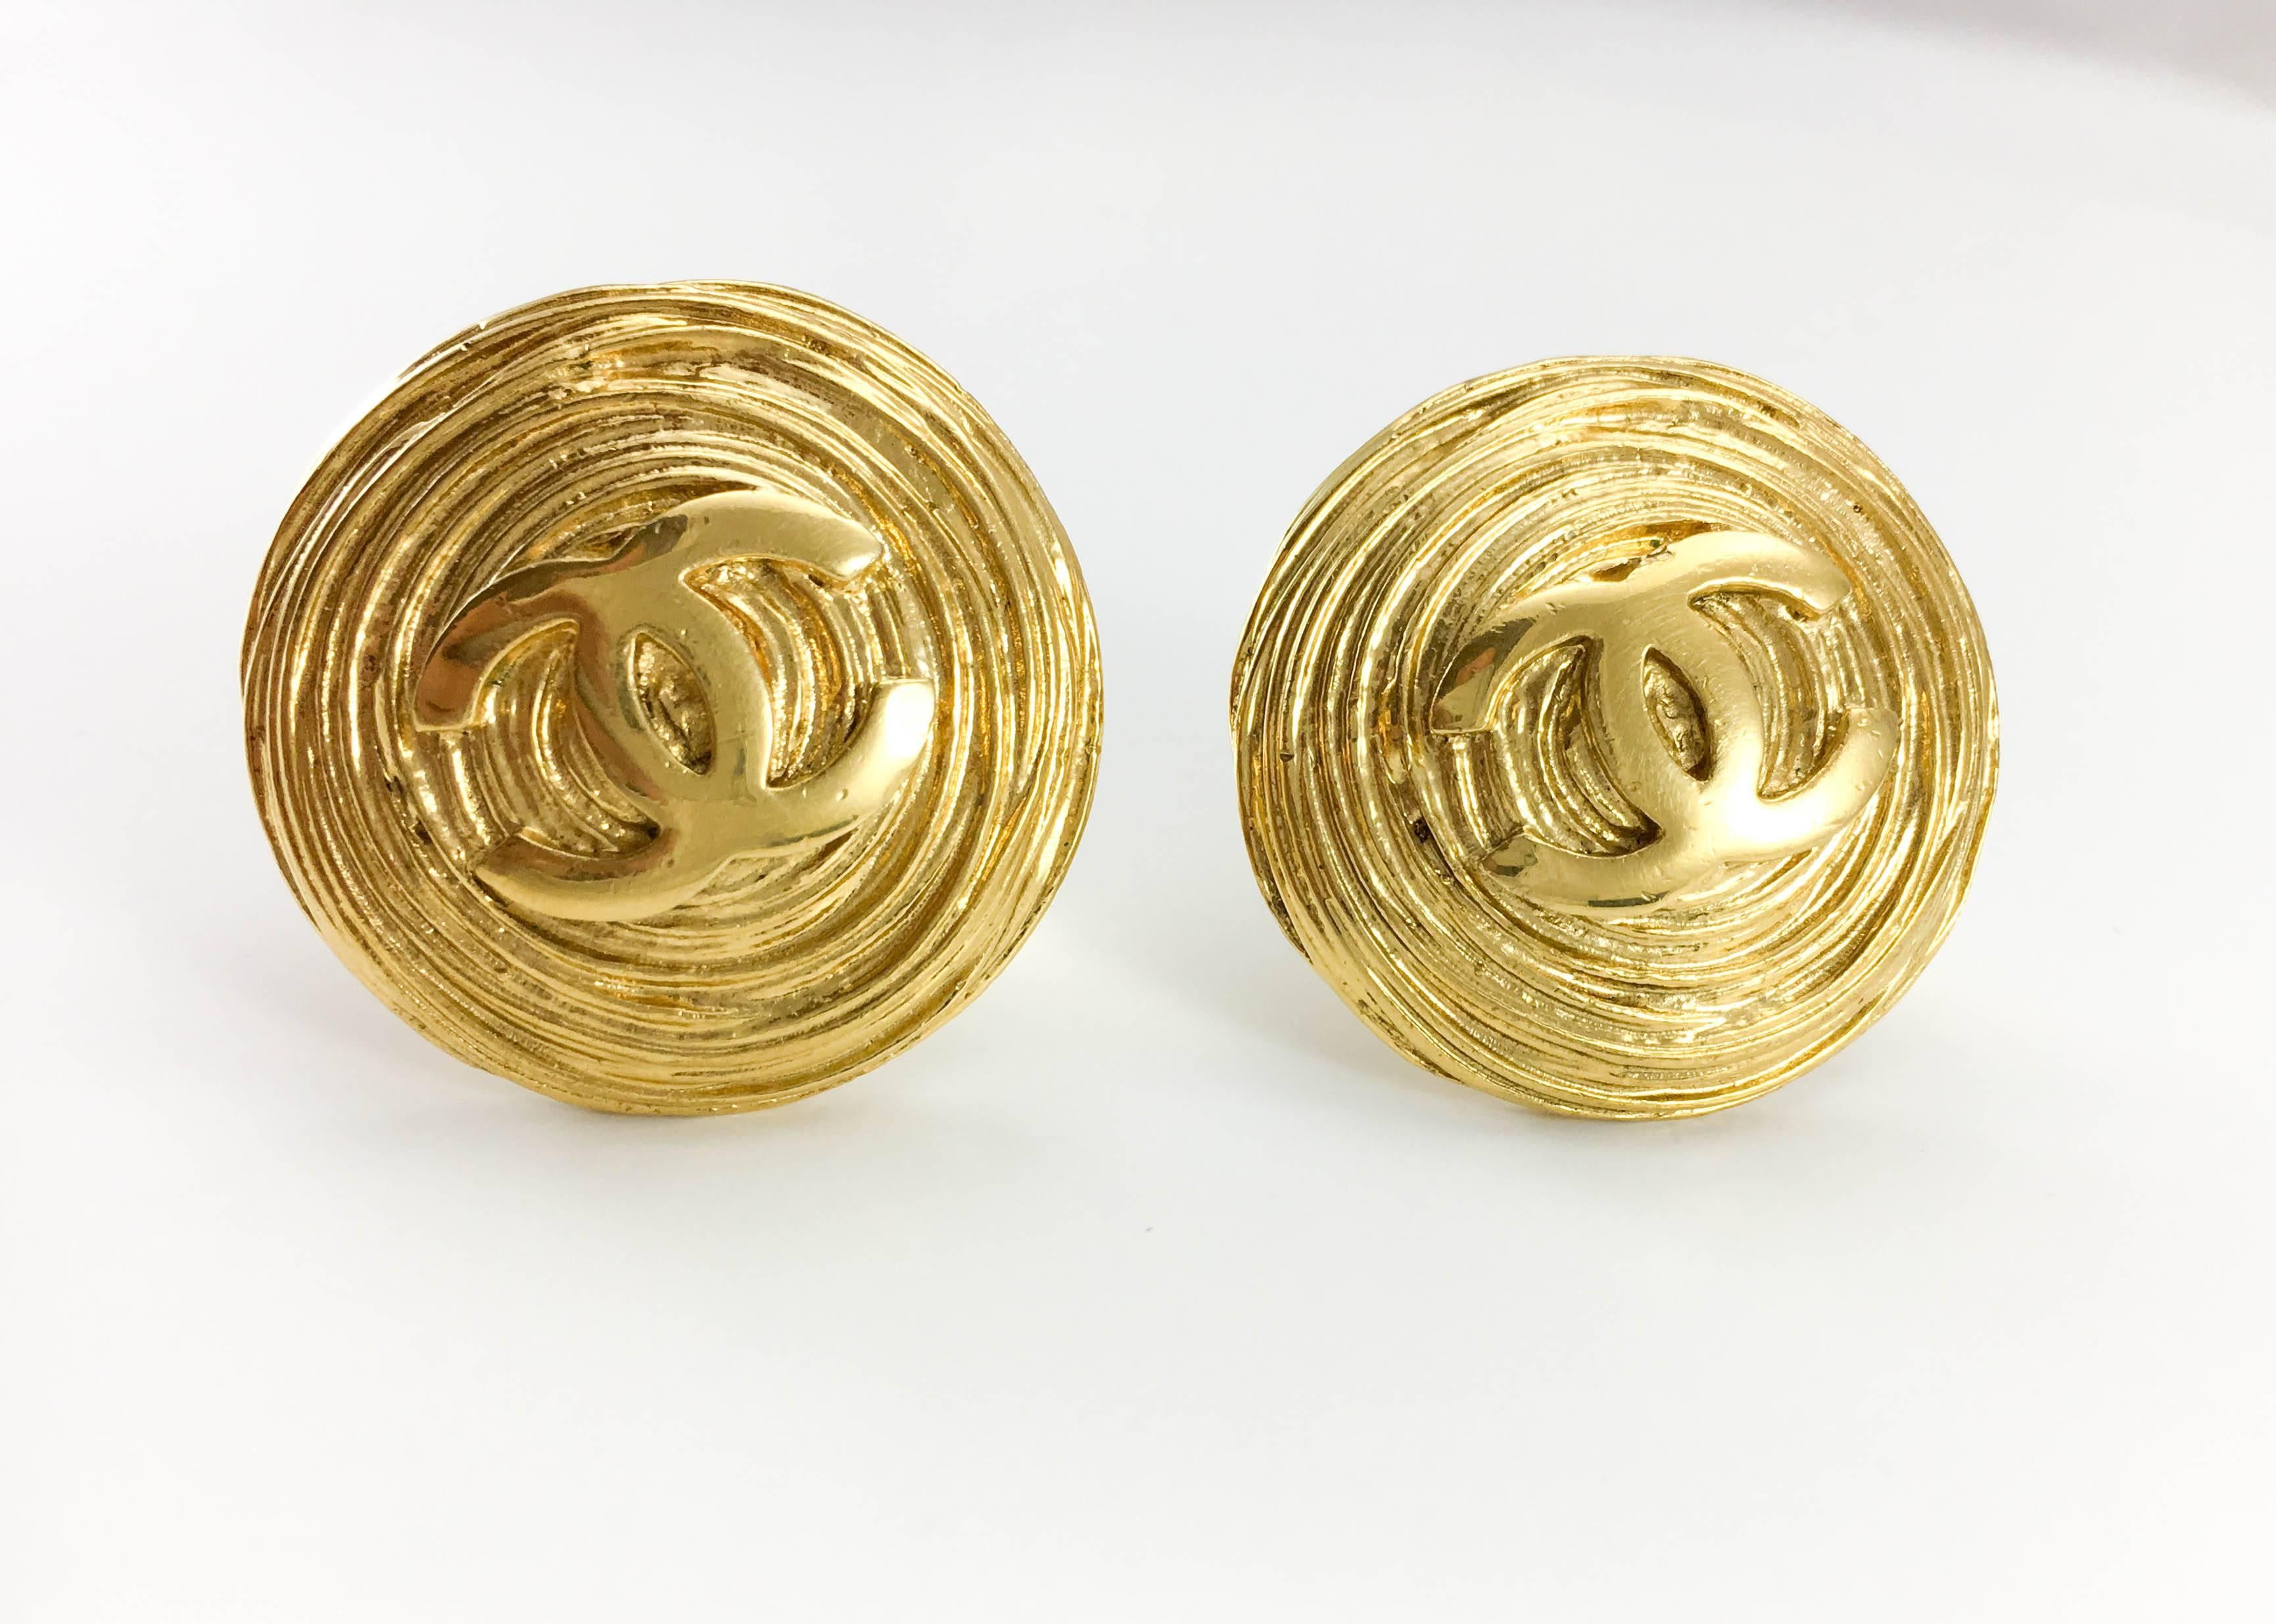 Vintage Chanel Gold-Plated Logo Clip-On Earrings. These amazing looking earrings by Chanel were made in 1988 (collection 25). Designed by super jewellery designer Victoire de Castellane, it brings her dramatic high-fashion signature. They feature